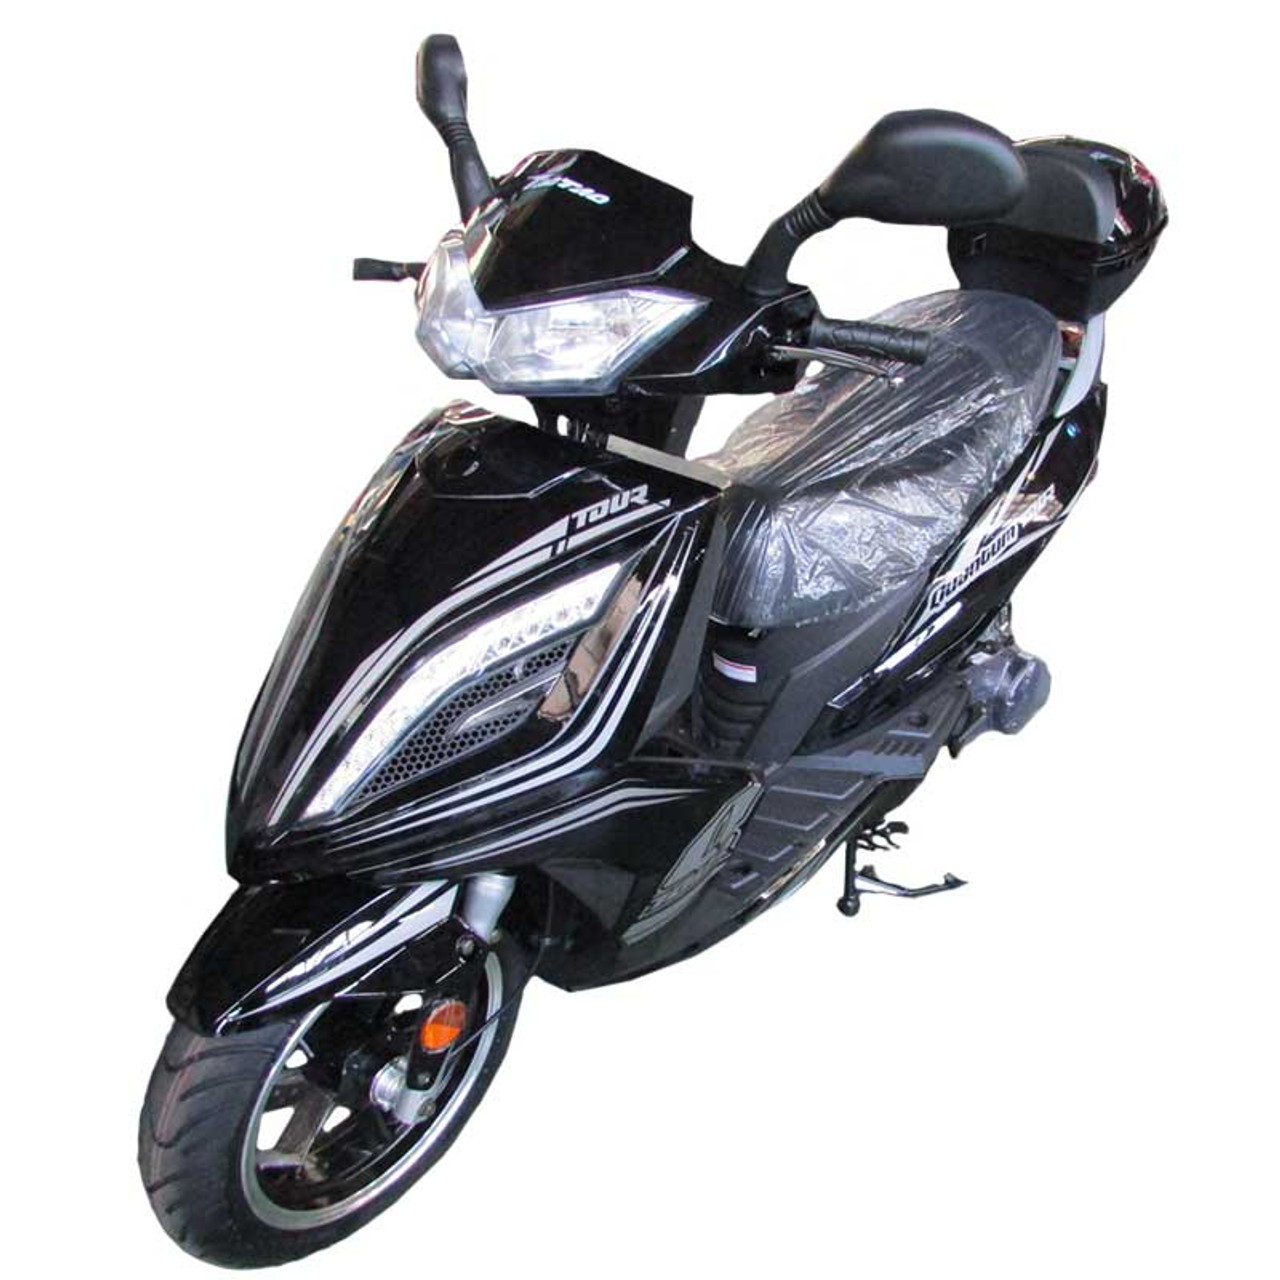 Taotao Quantum Tour 150cc Gas Street Legal Scooter Fully Assembled and Tested - Black